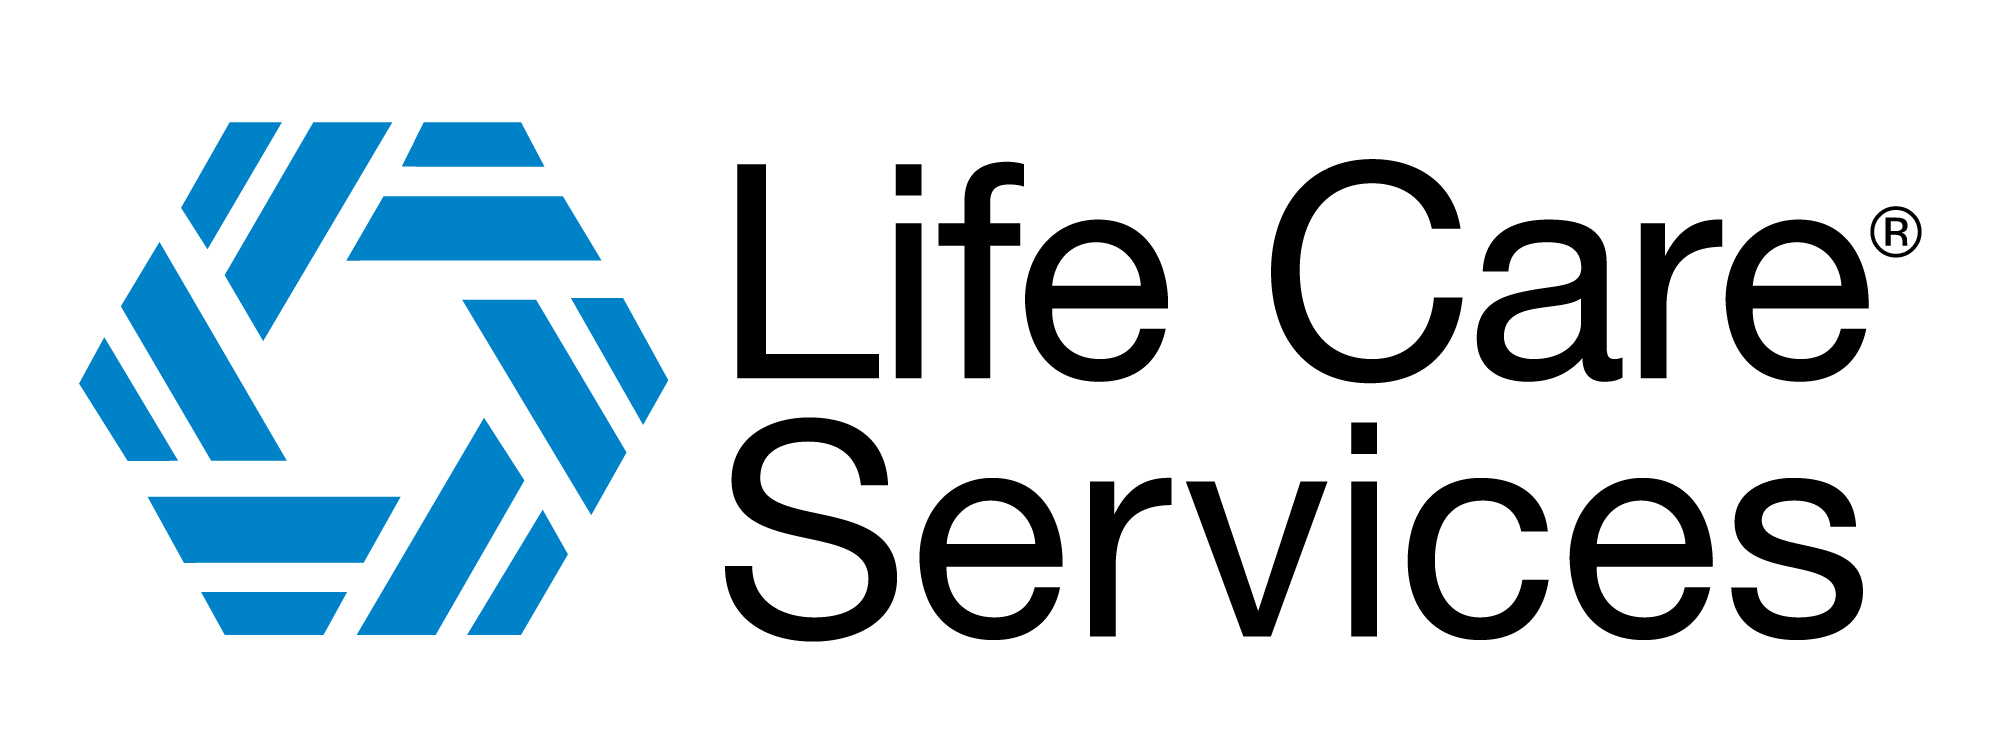 life care services to manage 13 communities